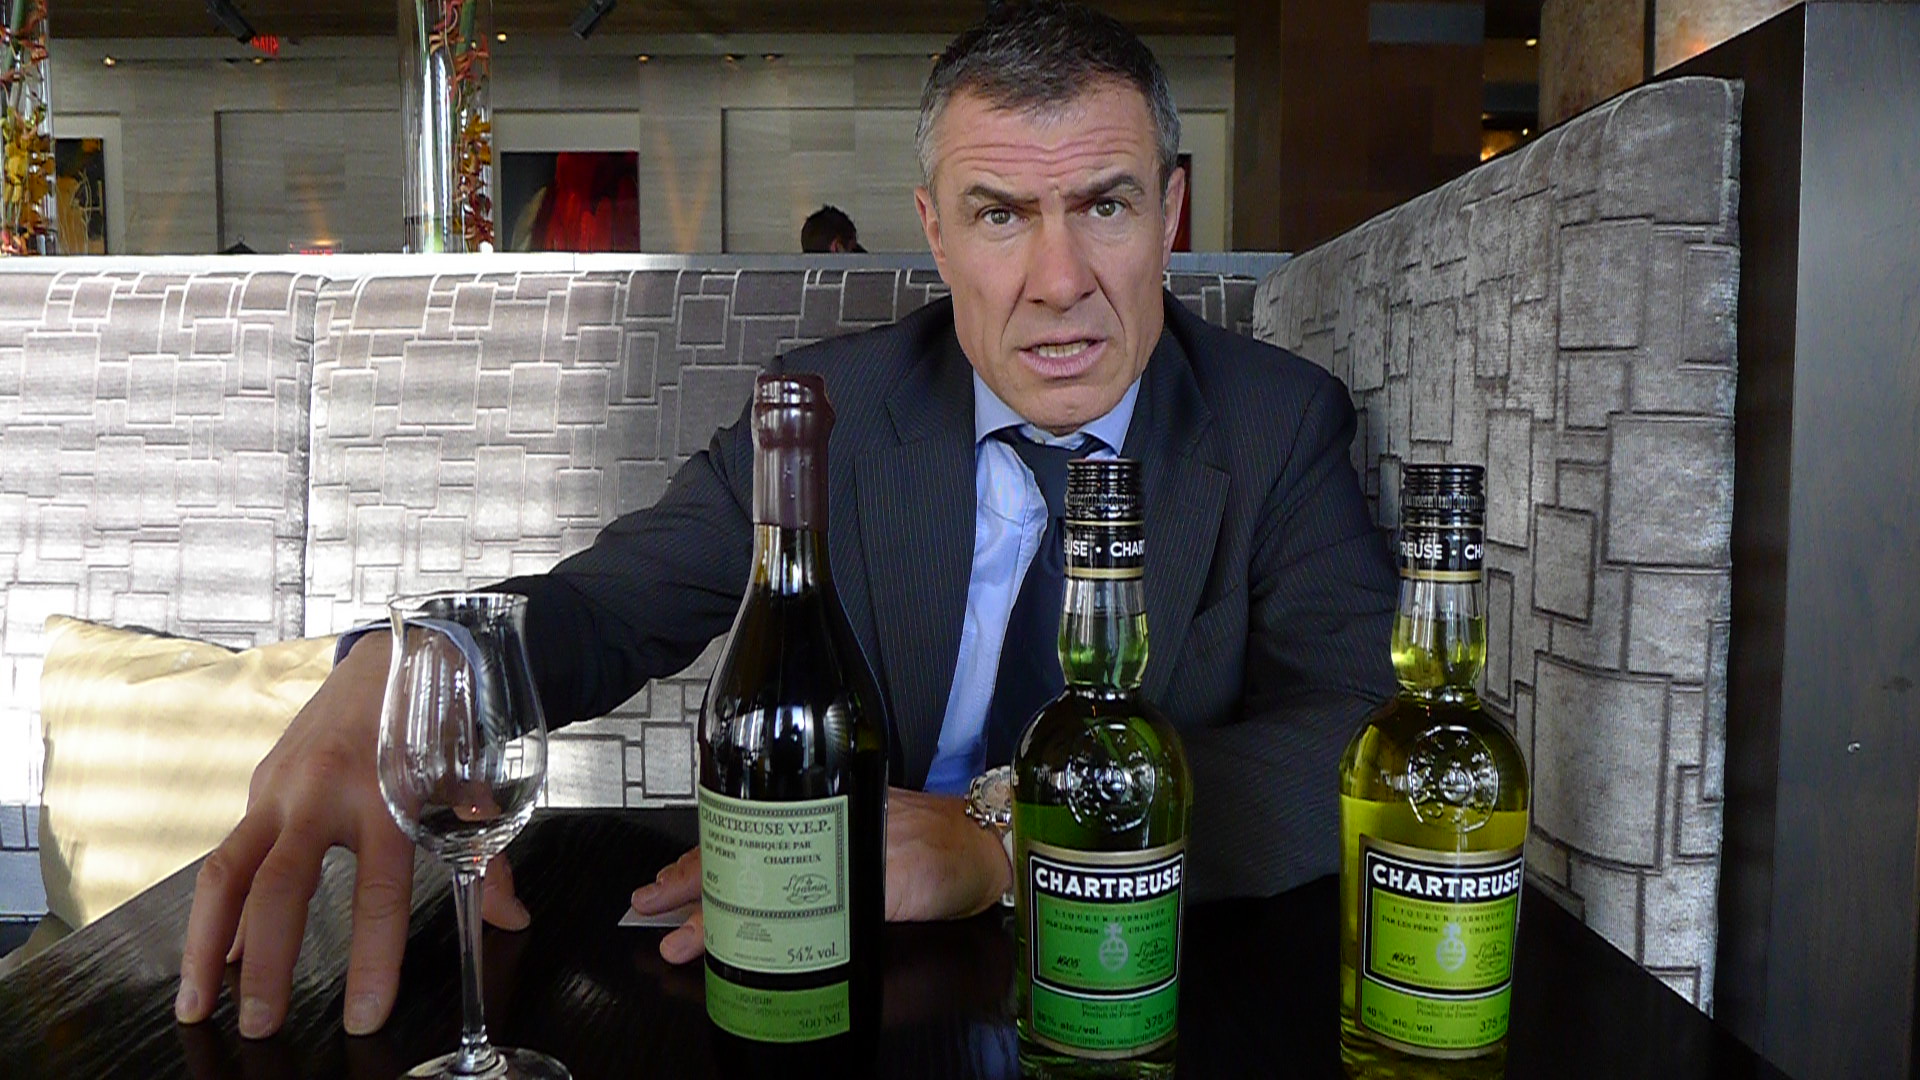 Chartreuse's Philippe Rochez is serious about his elixir.